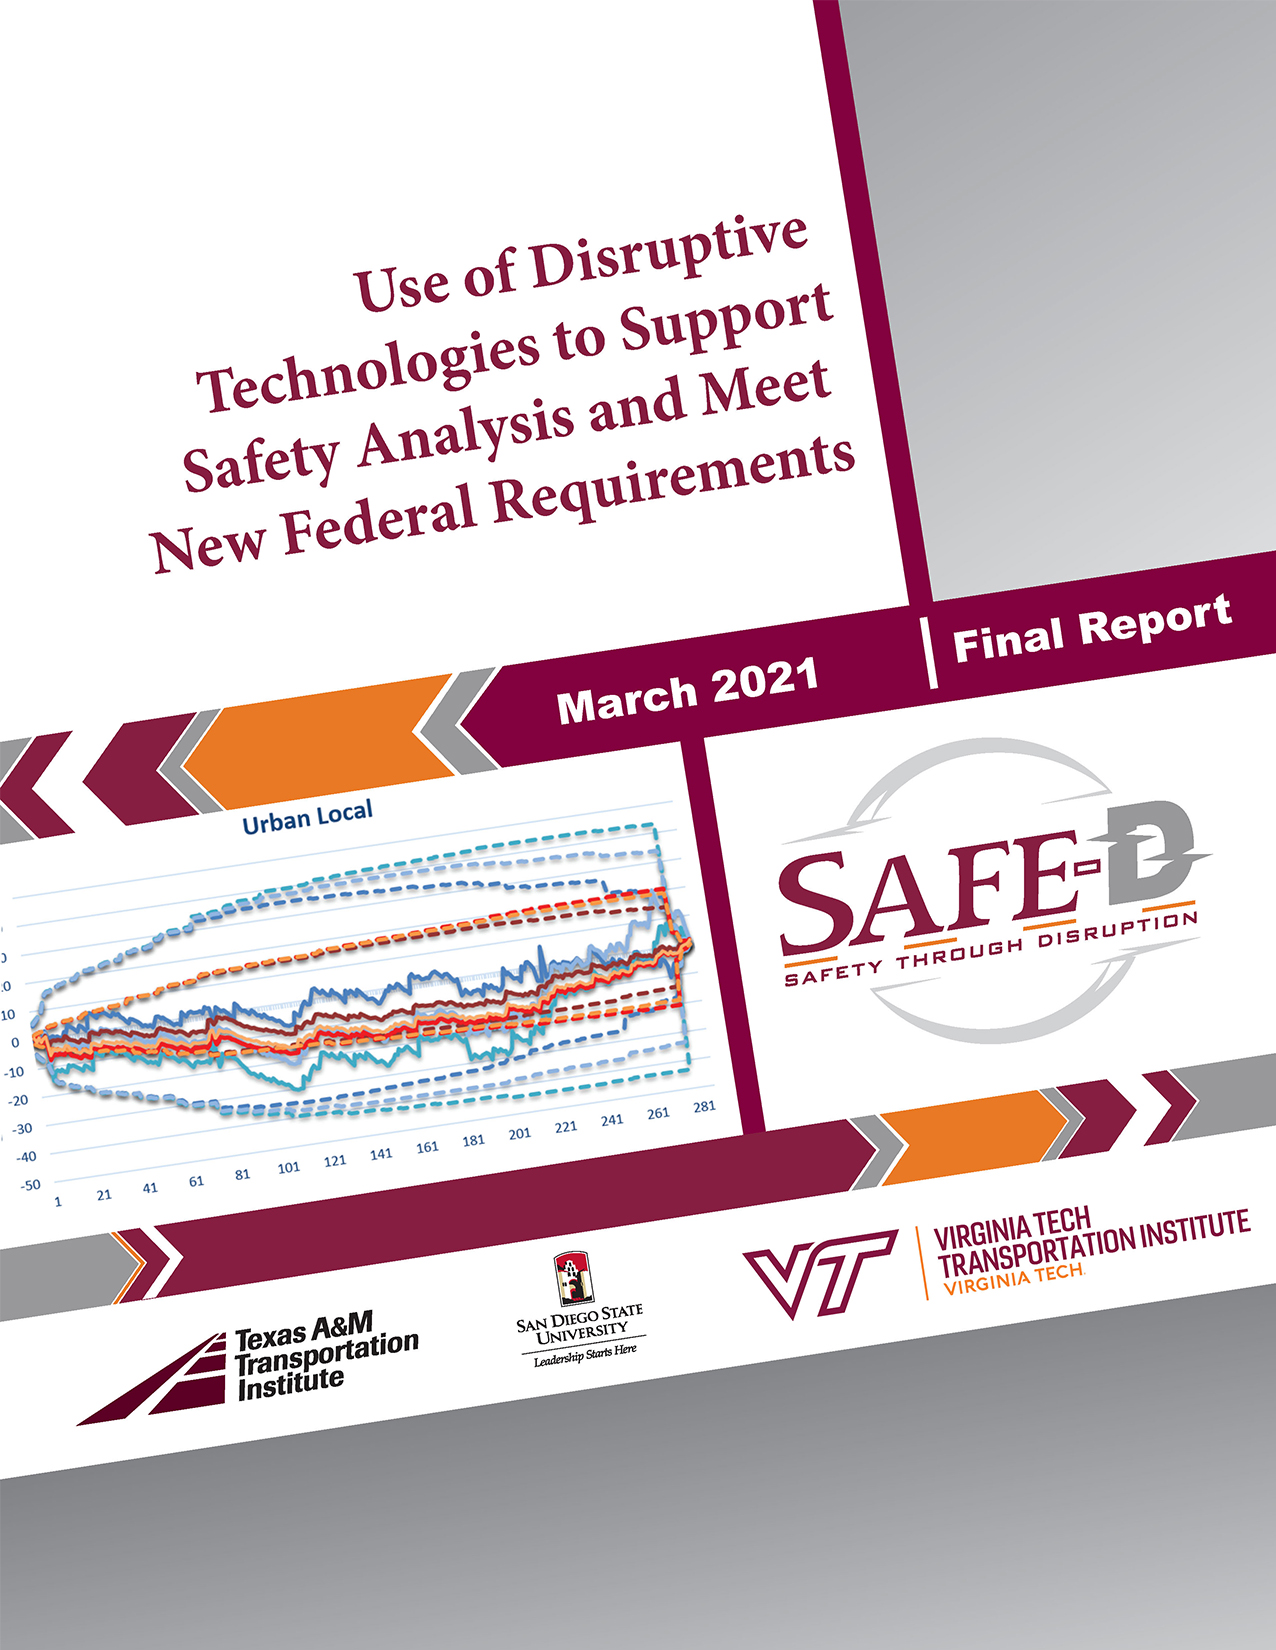 04-113 Use of Disruptive Technologies to Support Safety Analysis and Meet New Federal Requirements